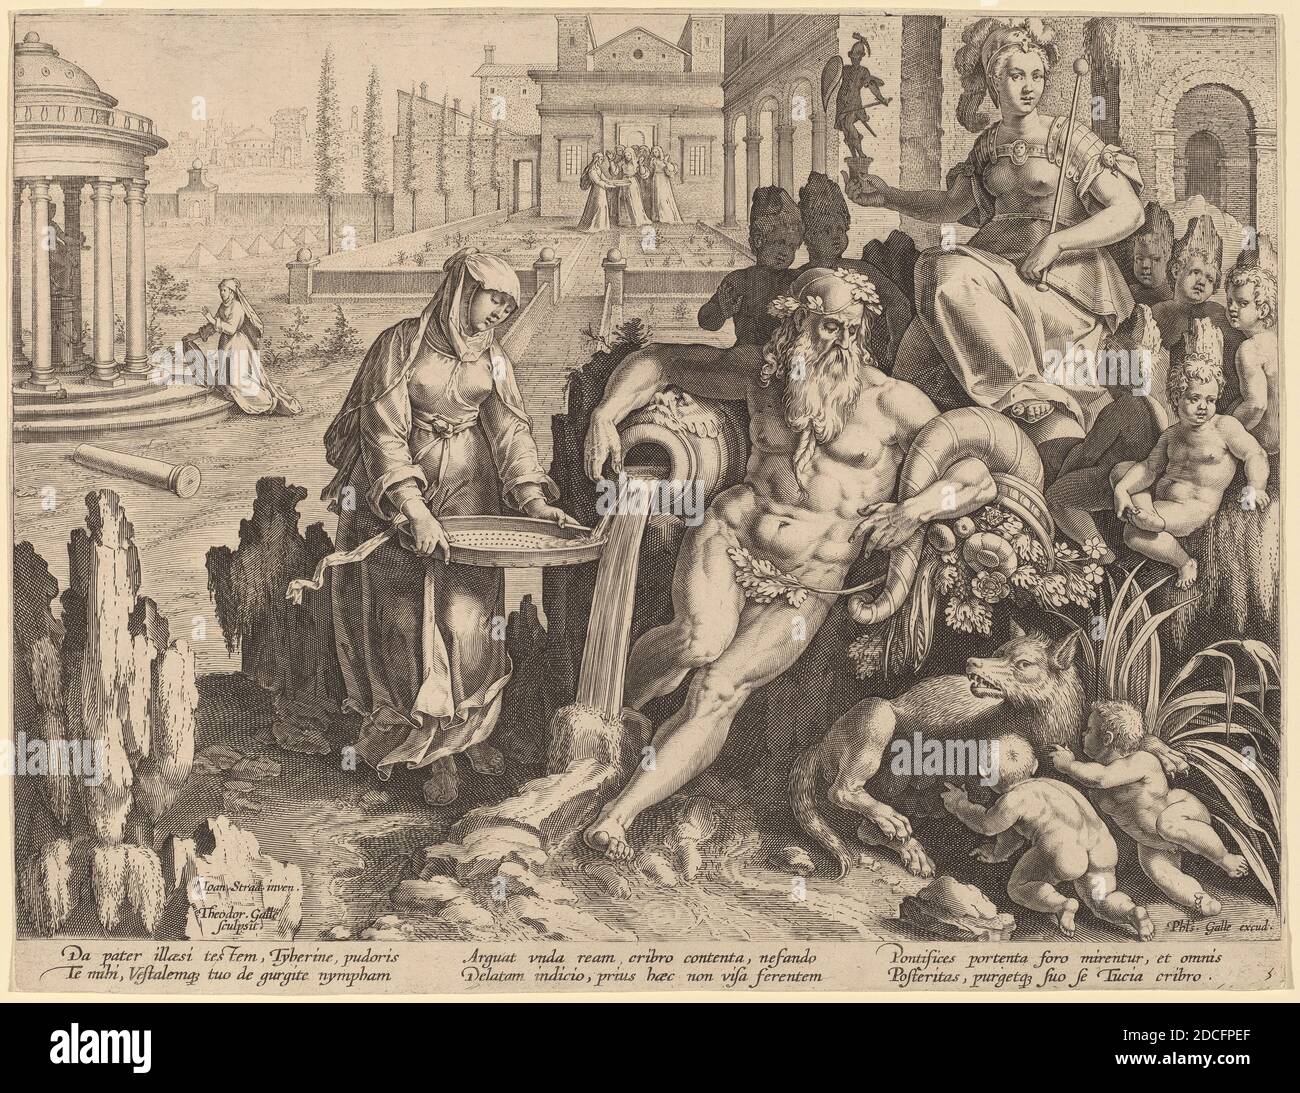 Theodor Galle, (artist), Flemish, c. 1571 - 1633, Jan van der Straet, (artist after), Flemish, 1523 - 1605, The River God Tiber with the Urn and the Vestal Tuccia, engraving on laid paper, plate: 21.8 x 28.2 cm (8 9/16 x 11 1/8 in.), Anonymous Gift Stock Photo